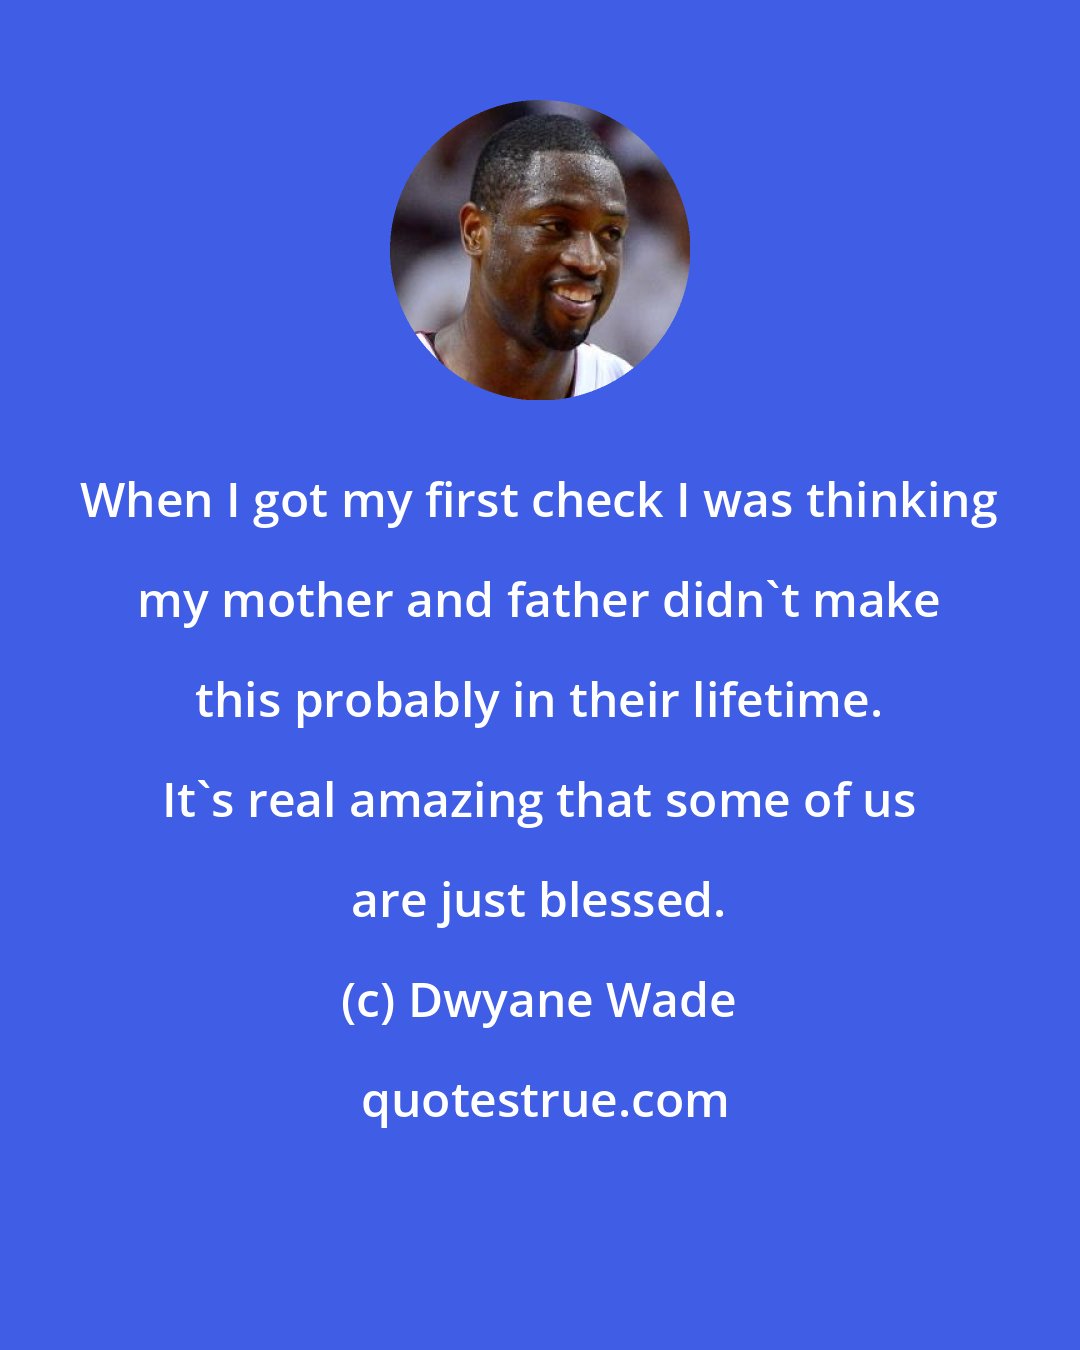 Dwyane Wade: When I got my first check I was thinking my mother and father didn't make this probably in their lifetime. It's real amazing that some of us are just blessed.